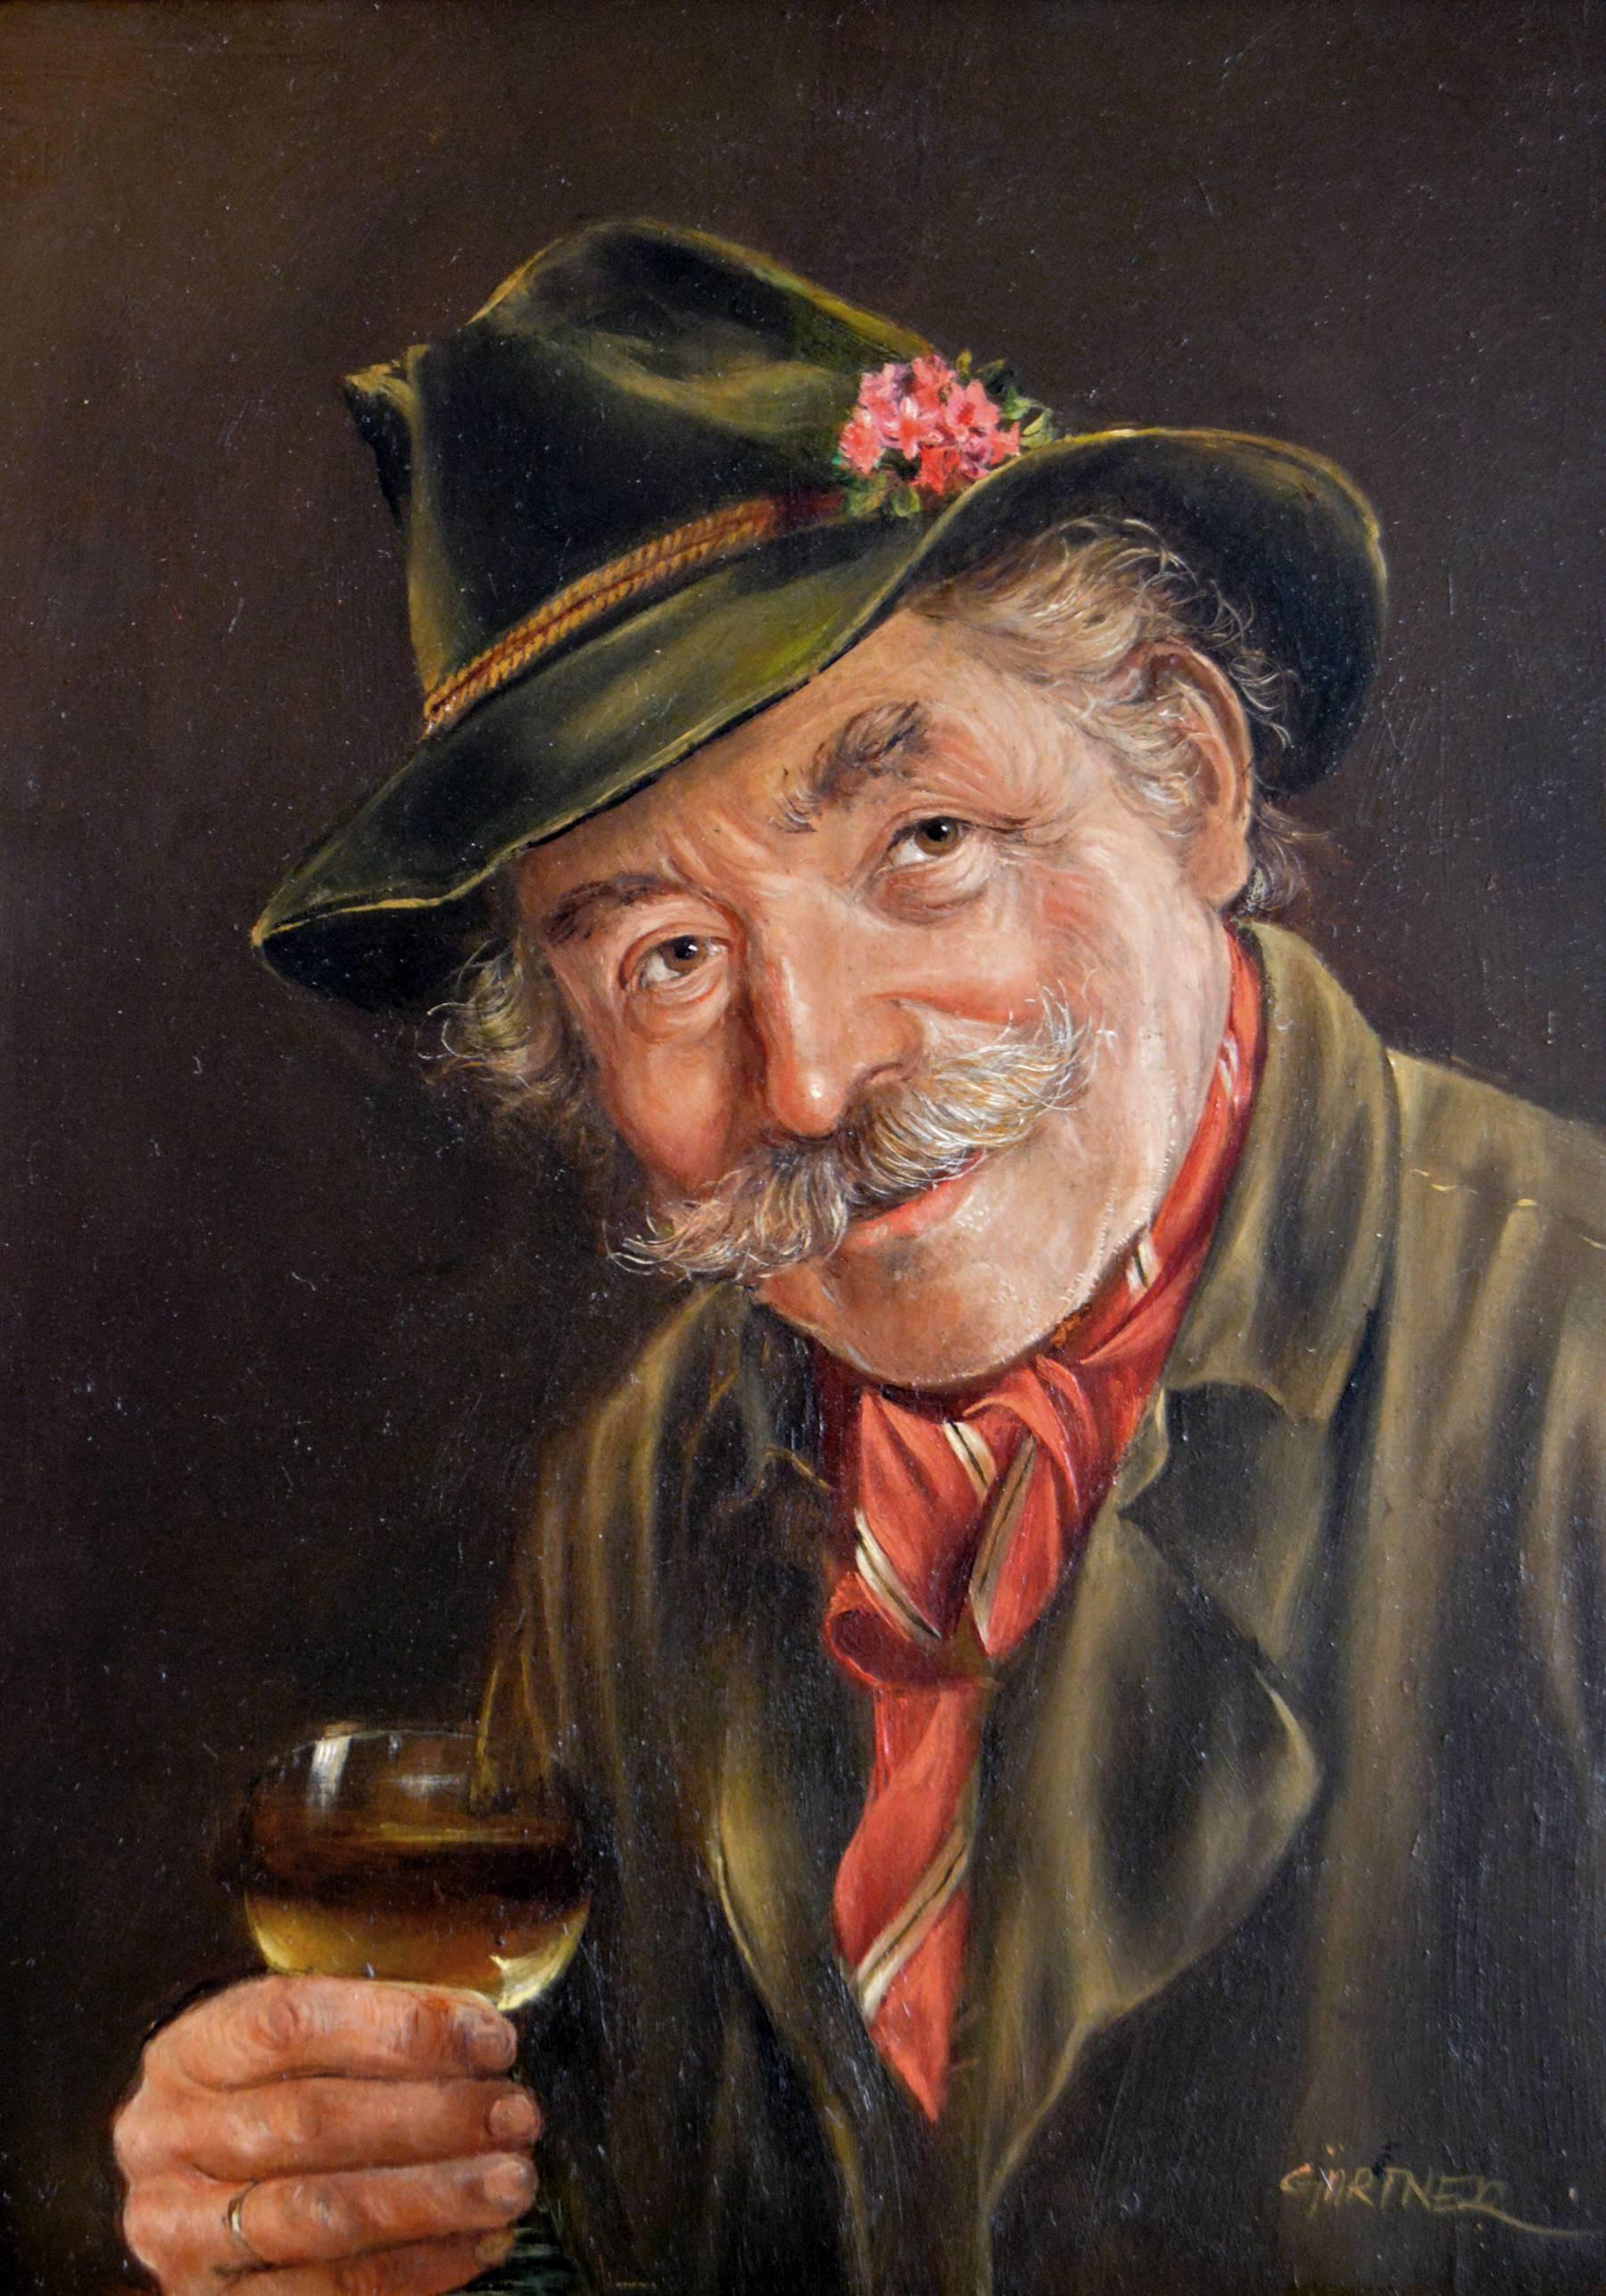 Glass of Moselle, oil on panel  - Painting by Hermine Gartner